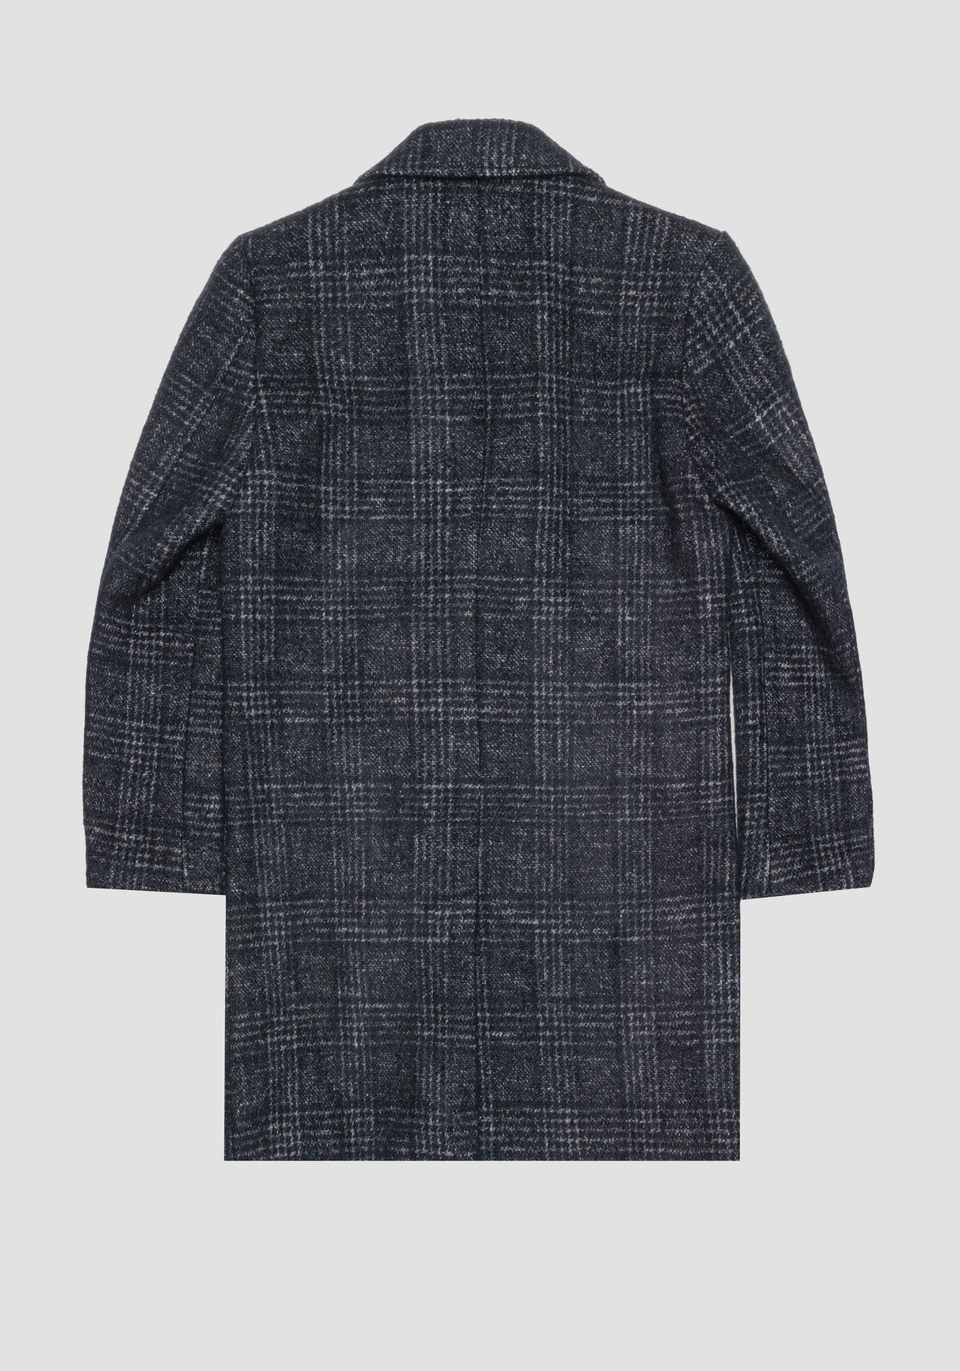 "MATHIAS" REGULAR FIT COAT IN WARM WOOL BLEND FABRIC WITH CHECK PATTERN - Antony Morato Online Shop